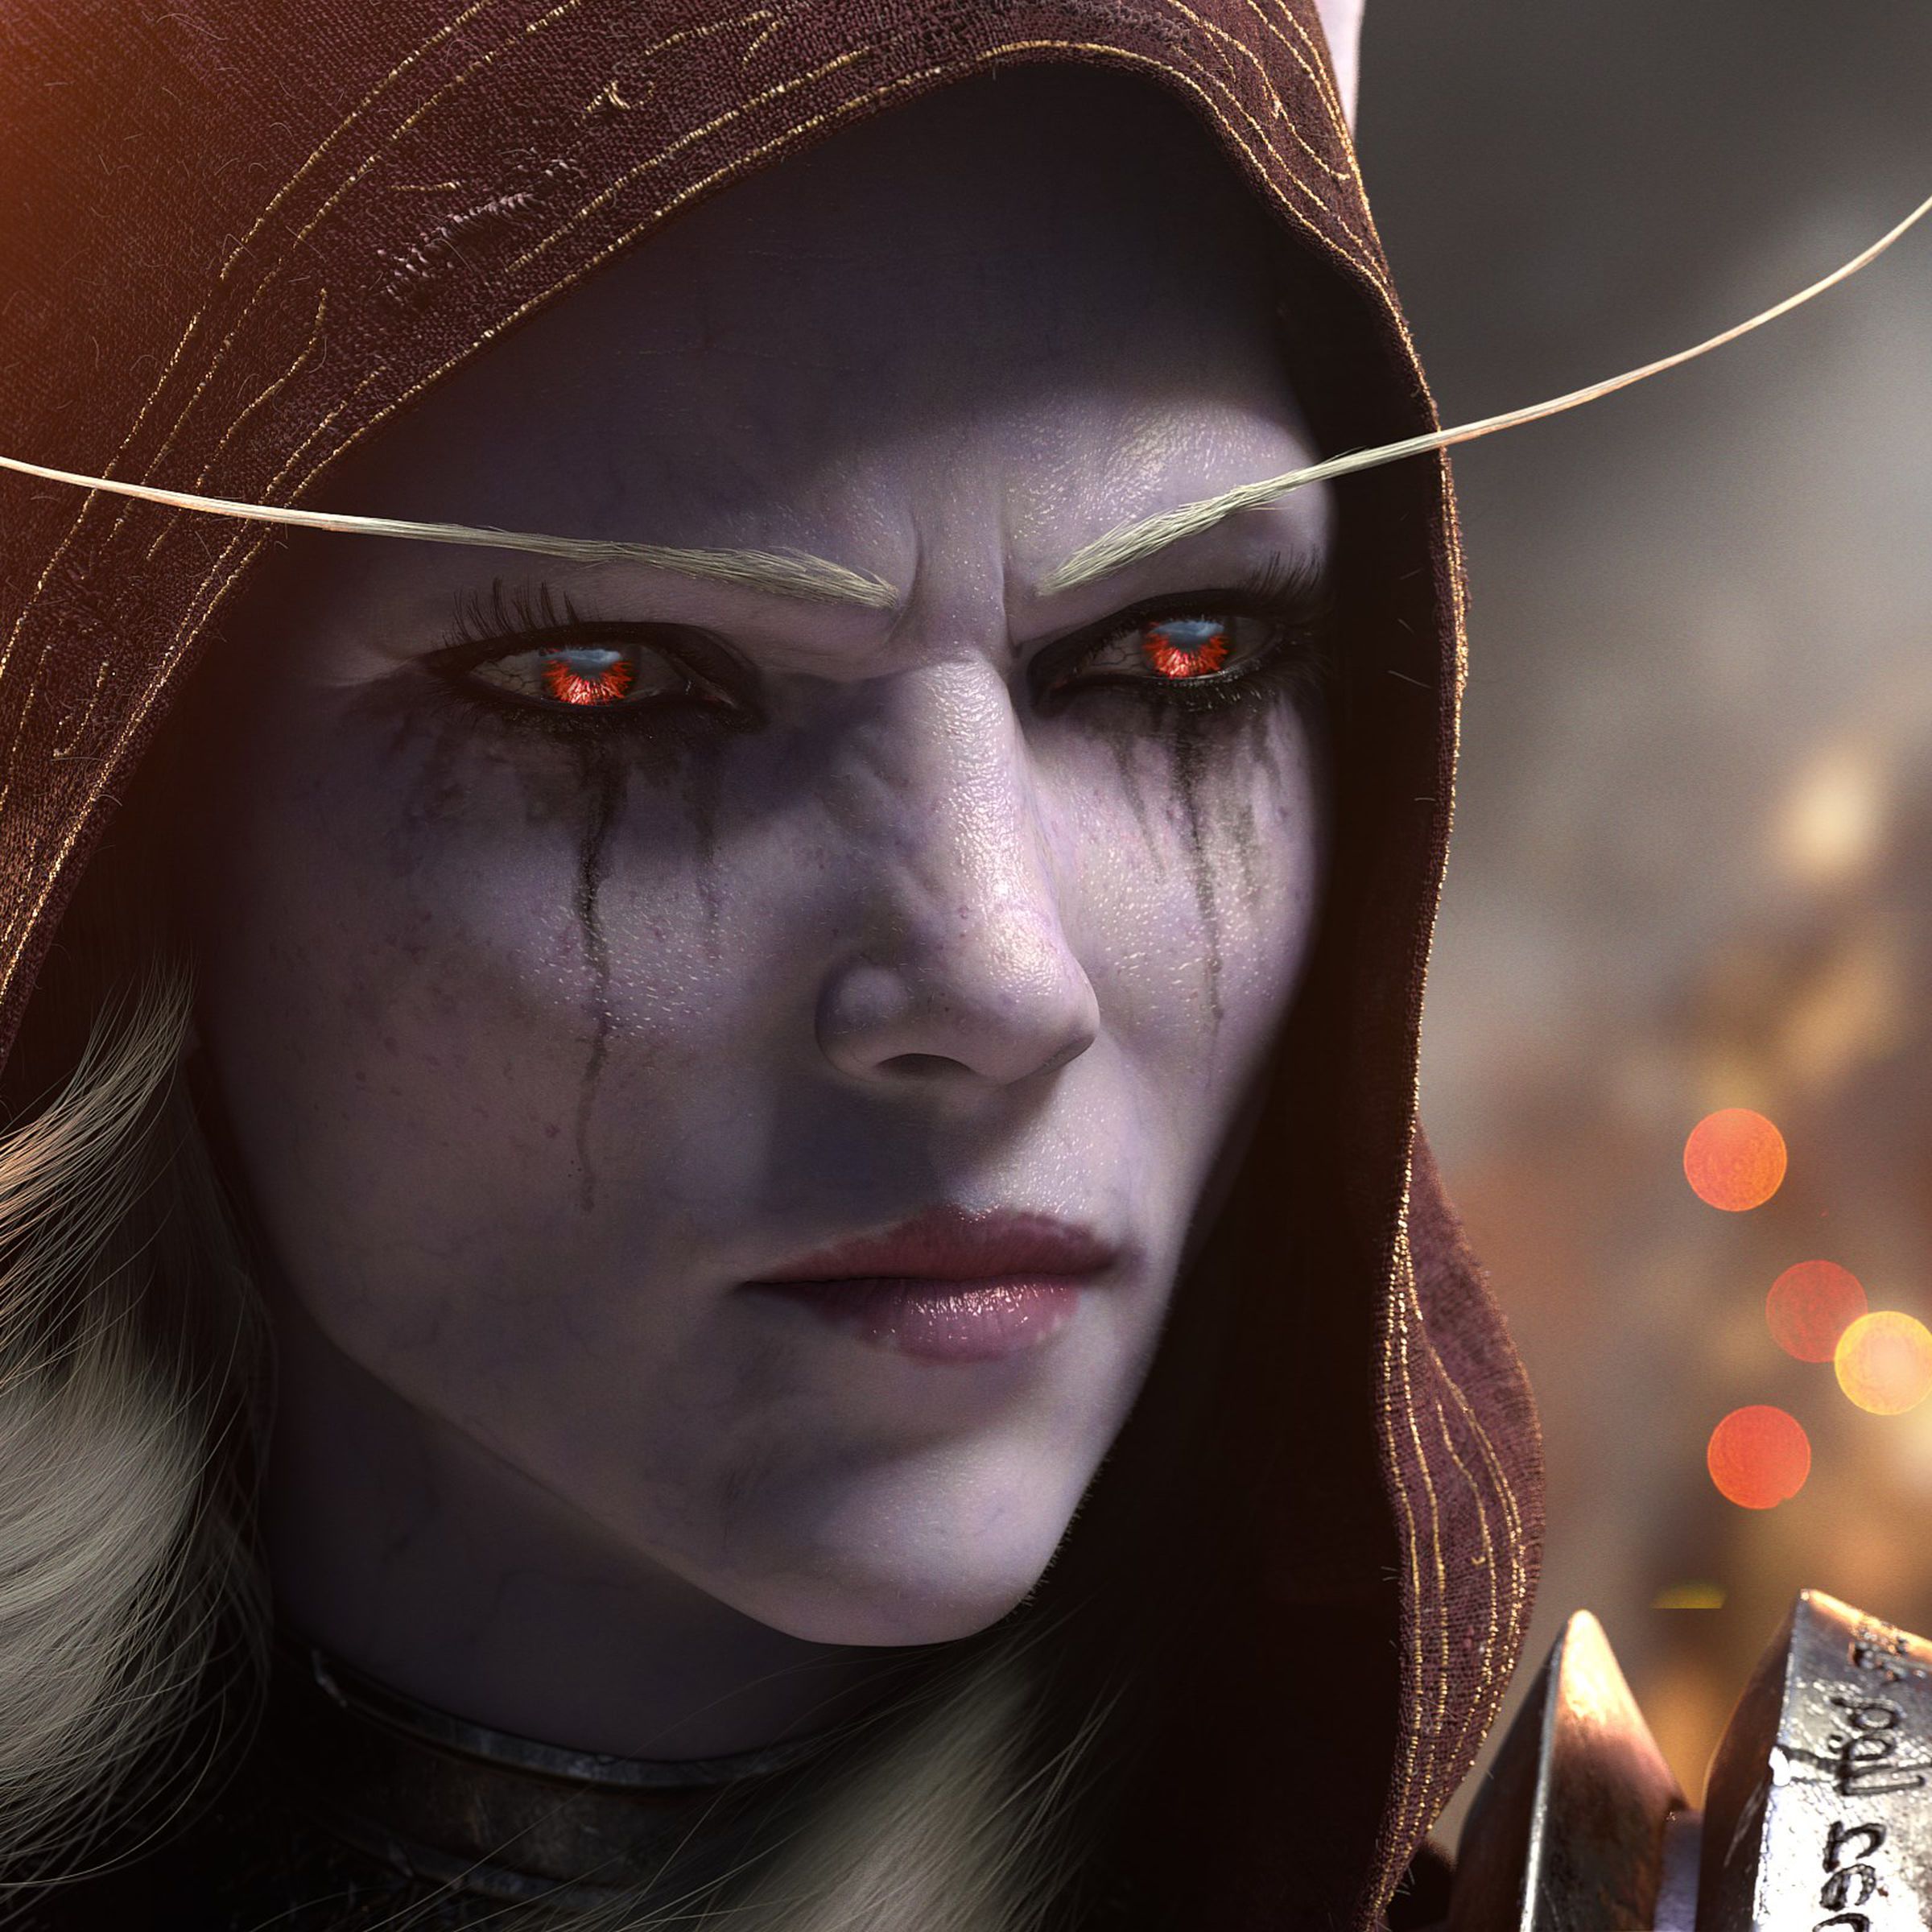 Screenshot from Battle For Azeroth launch cinematic featuring a close up of a scowling purple skinned elf